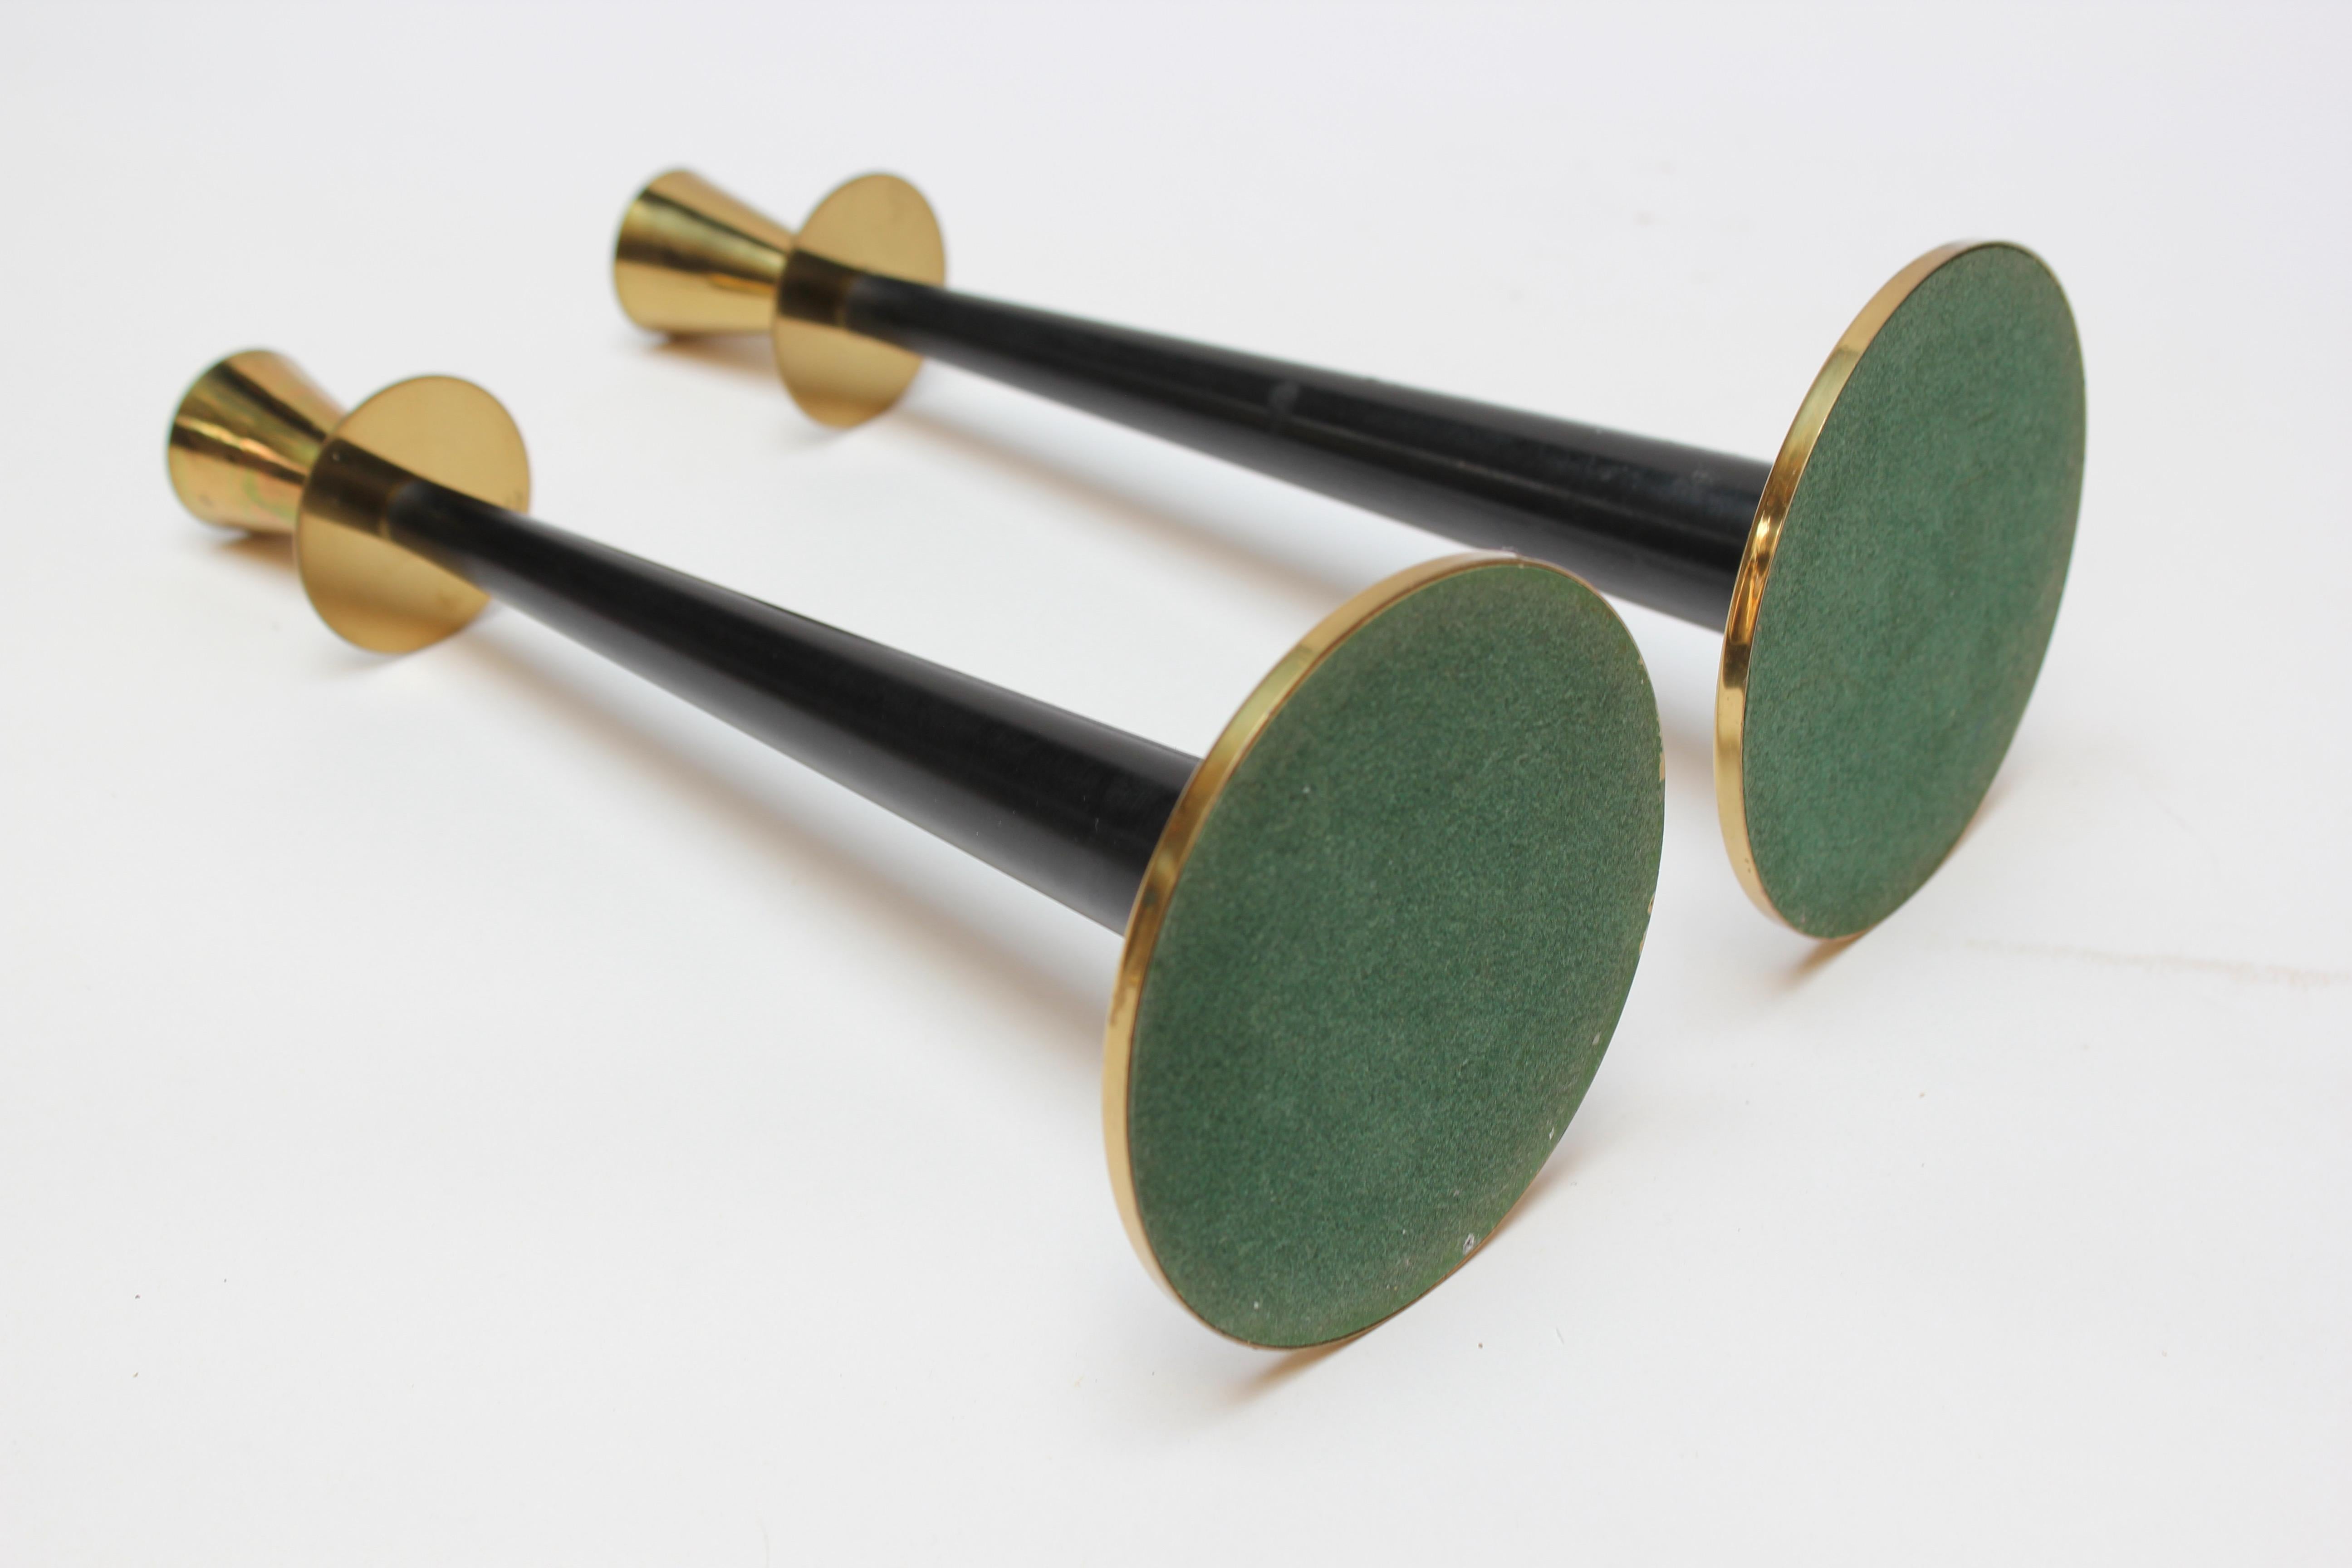 Elegant Swedish Modernist candlesticks by Adam Thylstrup for Nils Johan. Composed of elongated tapers in black bakelite with brass bases and holders. Original, unpolished condition retaining light wear / patina to the brass, along with very minor